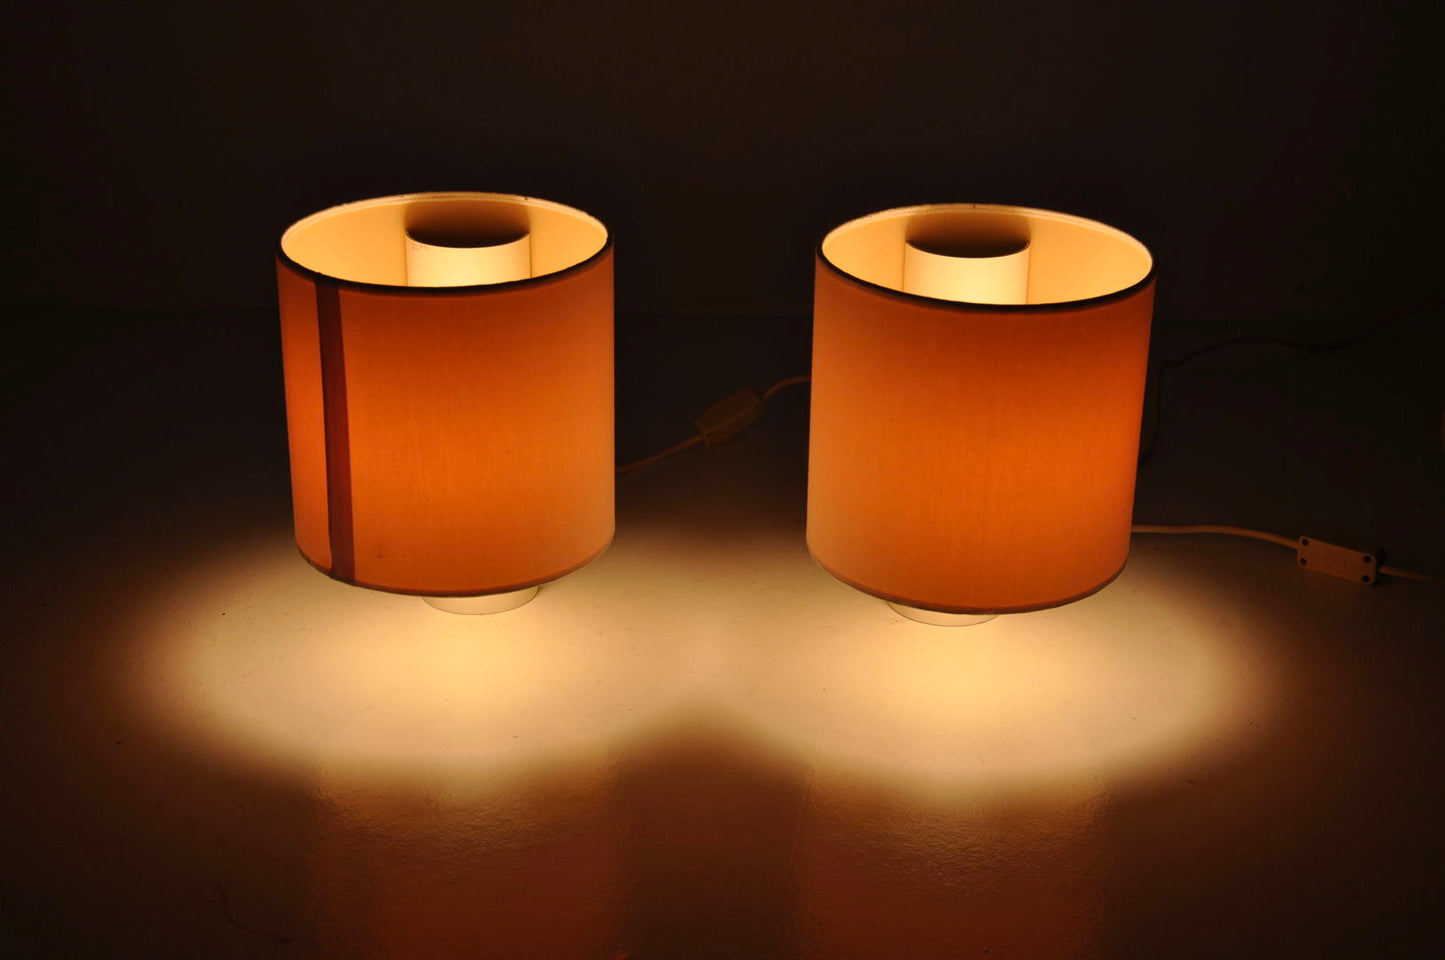 Pair of 'Fluette' Table Lamps by Giuliana Gramigna for